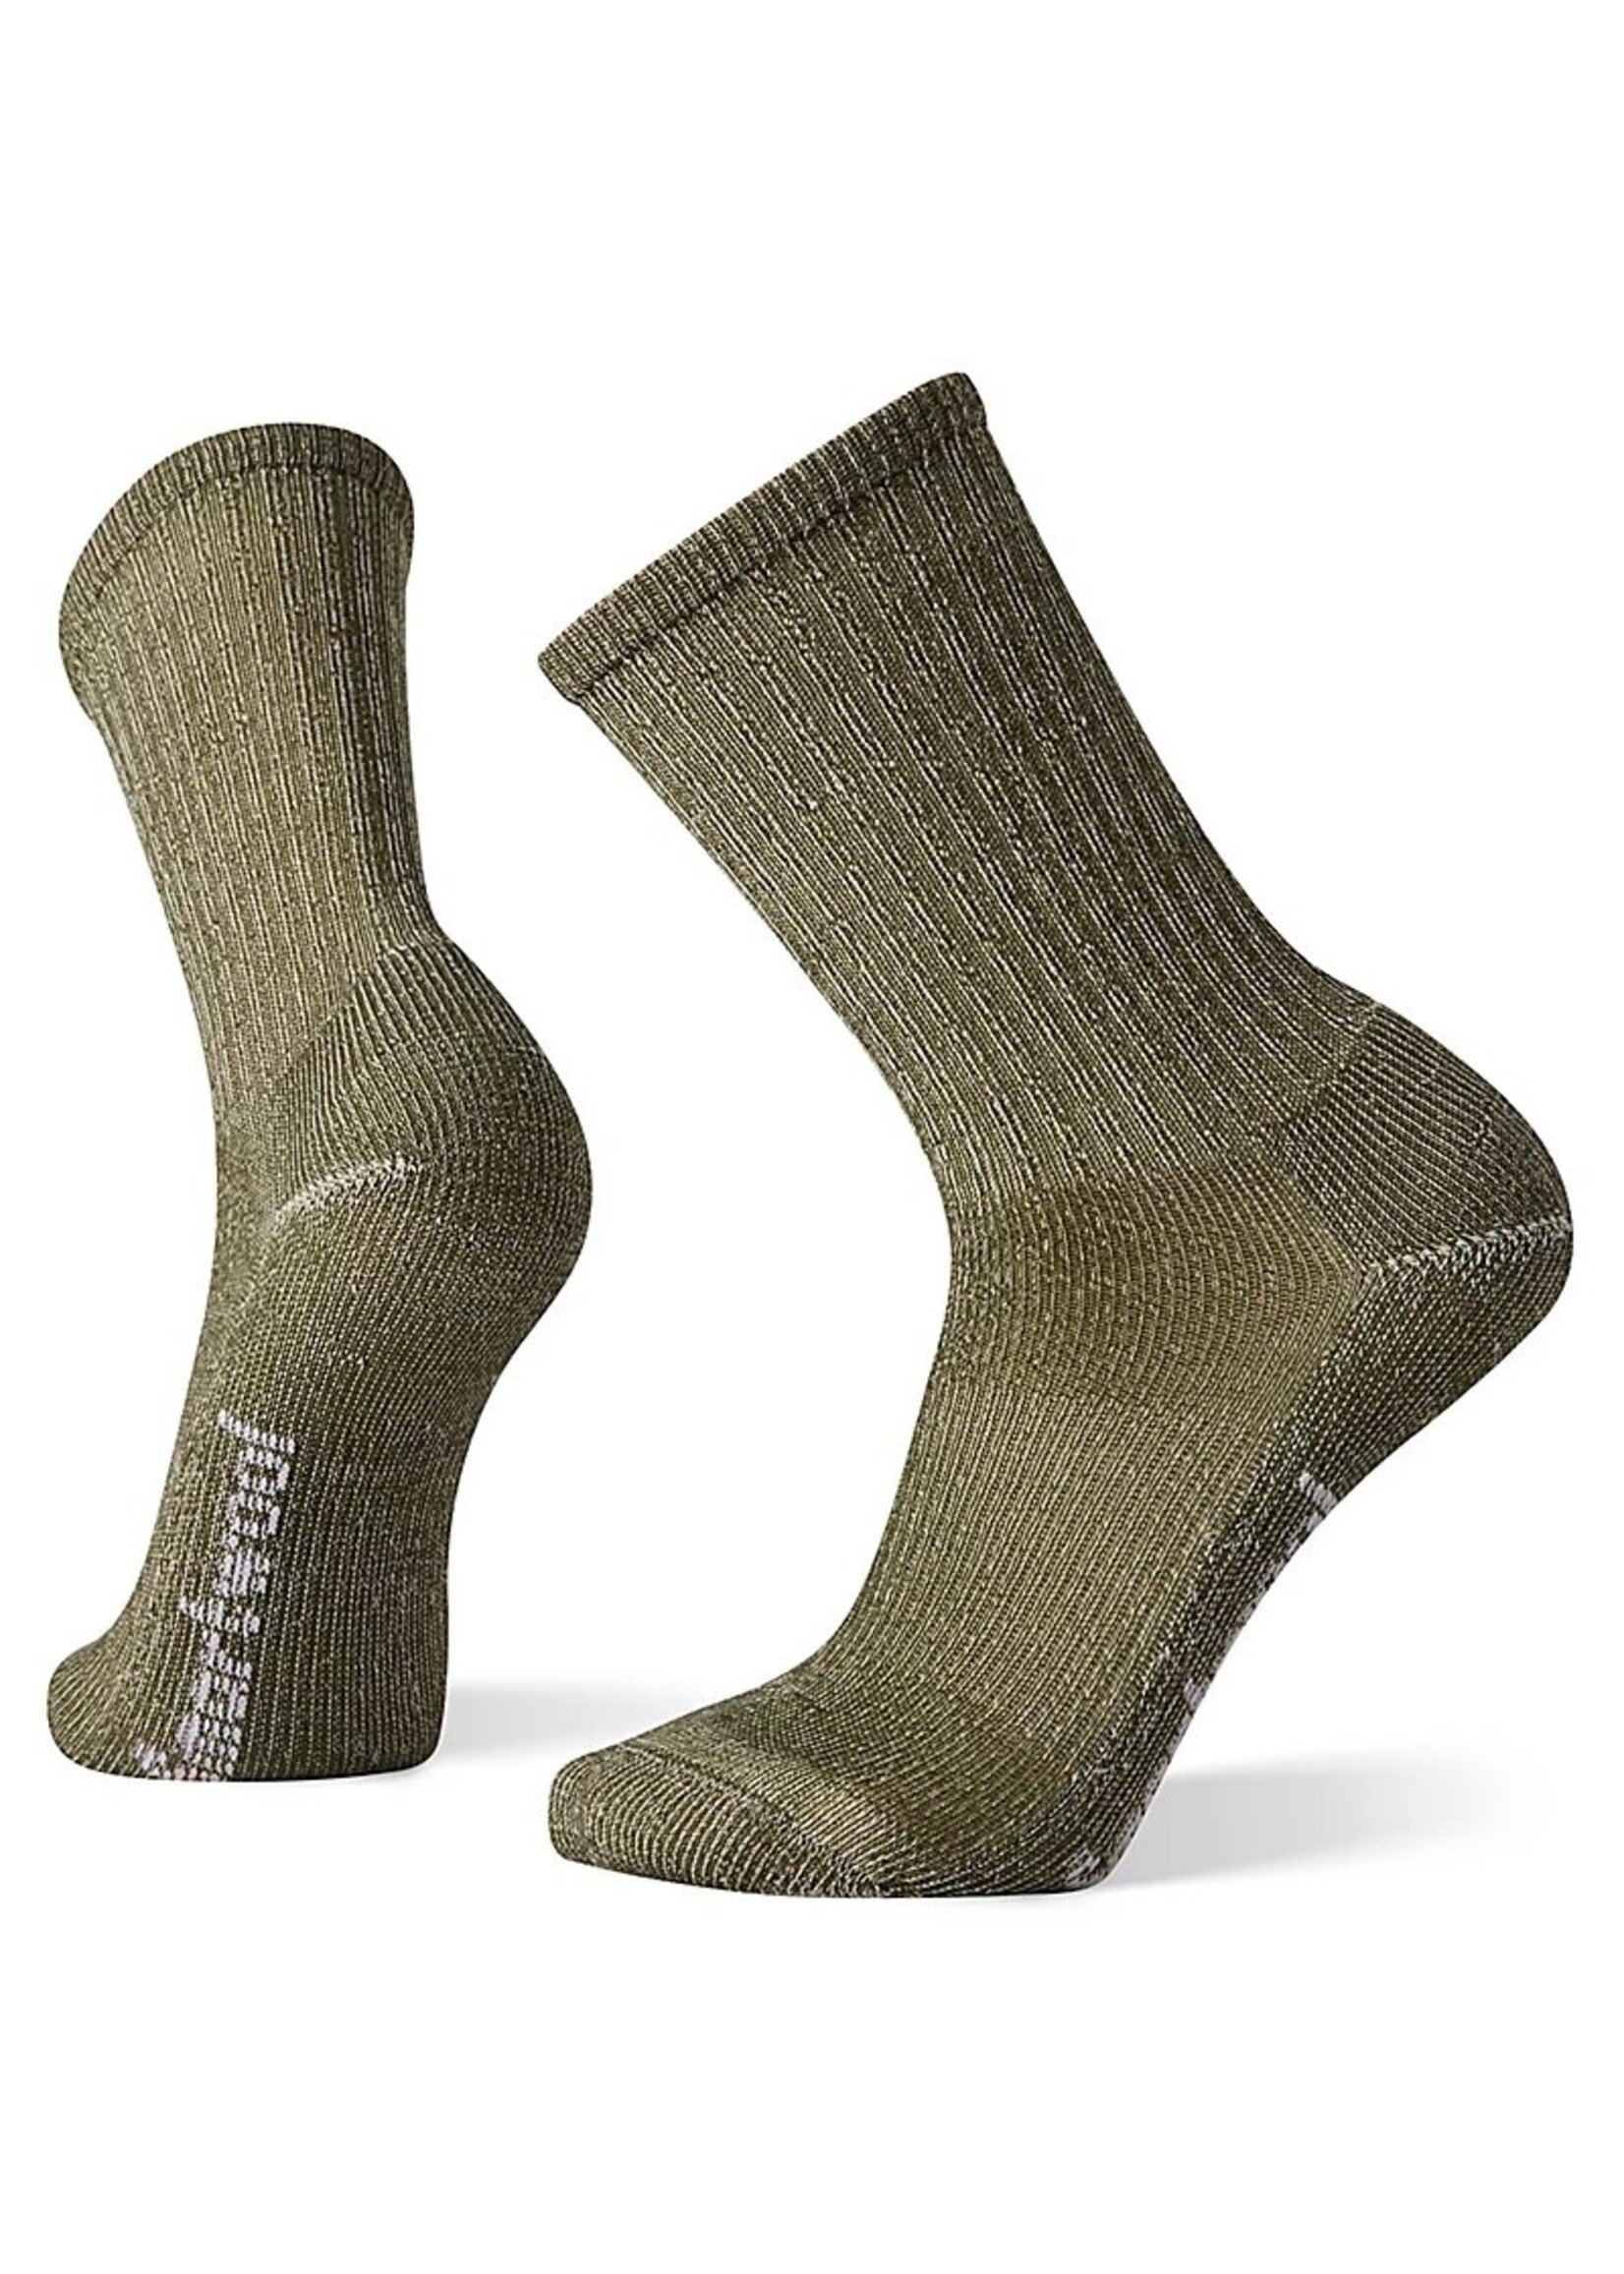 Smartwool Chaussette Smartwool Hike Classic Light Crew - Homme